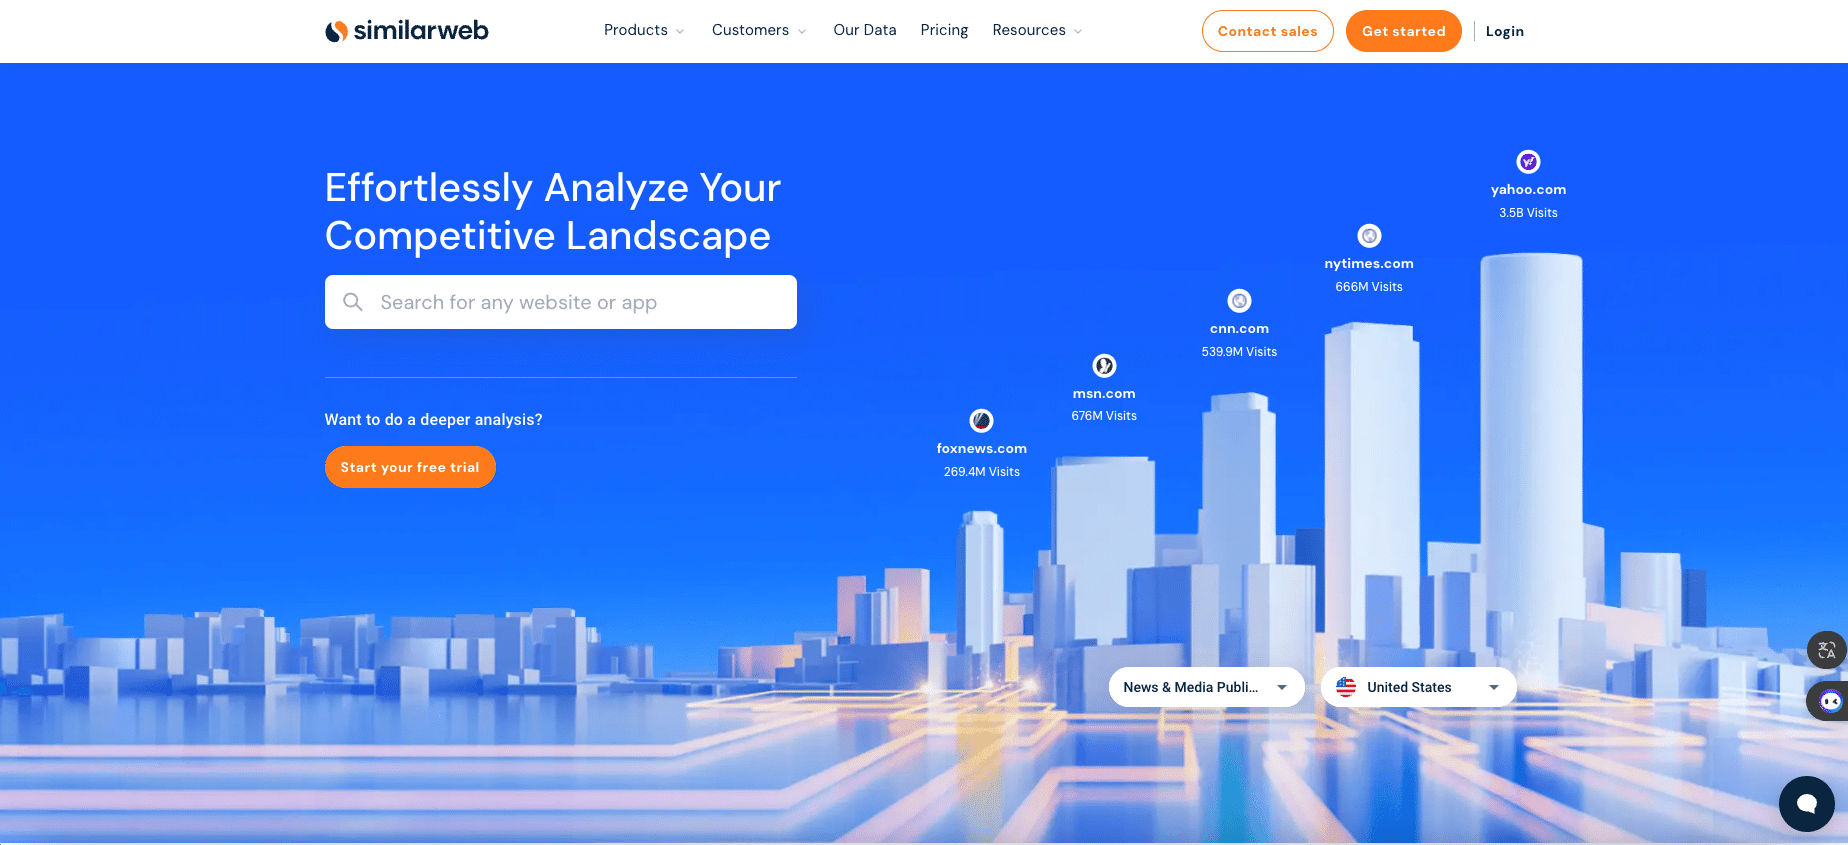 SimilarWeb Home Page Overview